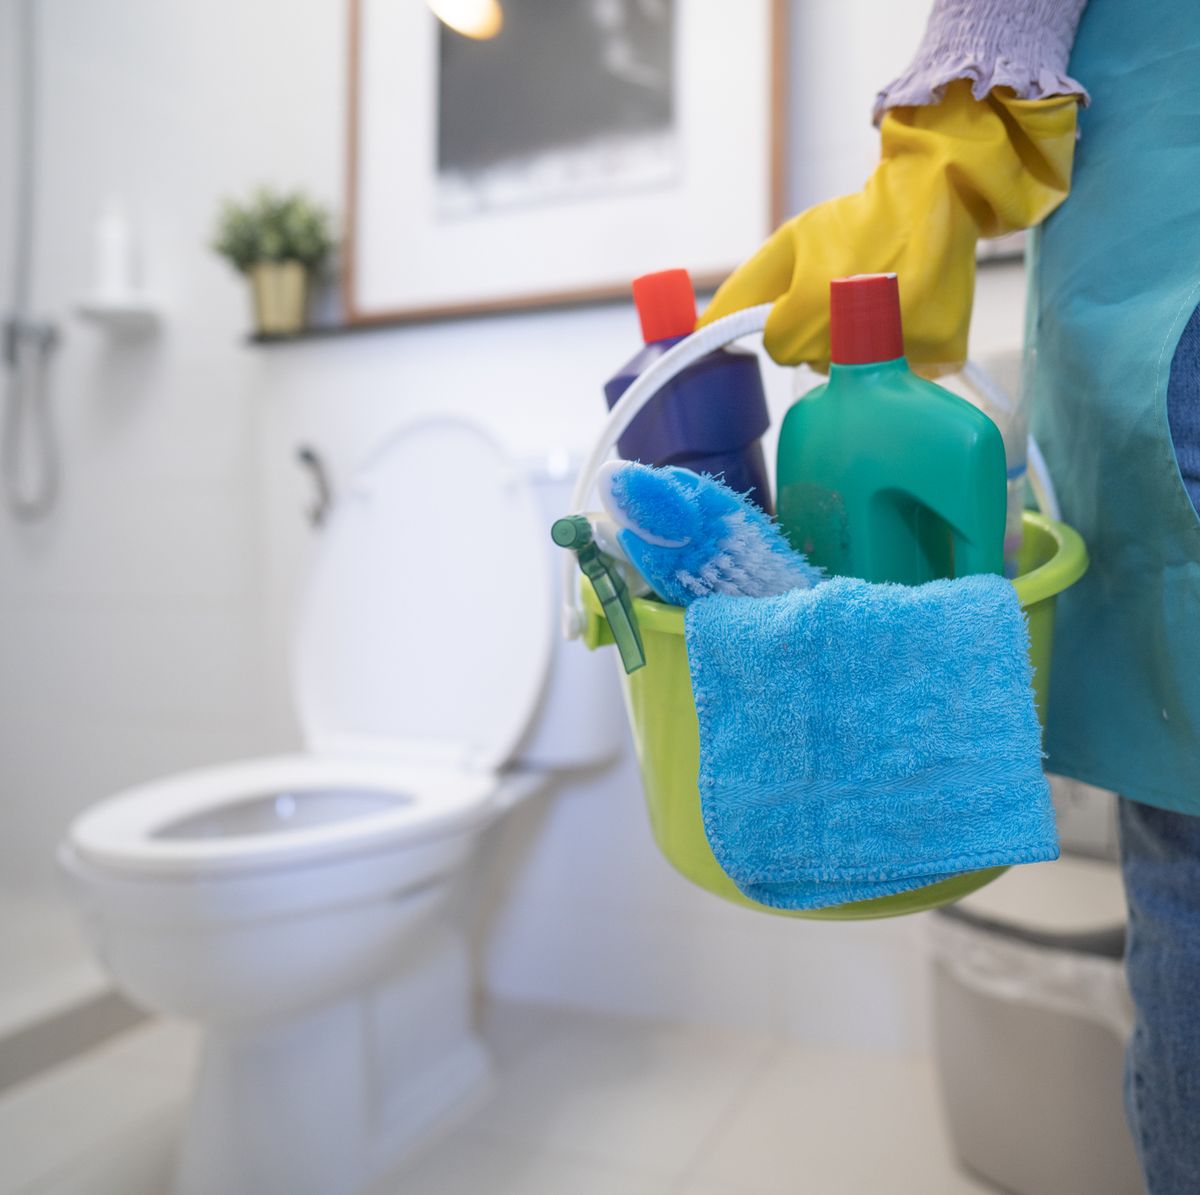 Can You Use Rid X in a Regular Toilet? What You Need to Know